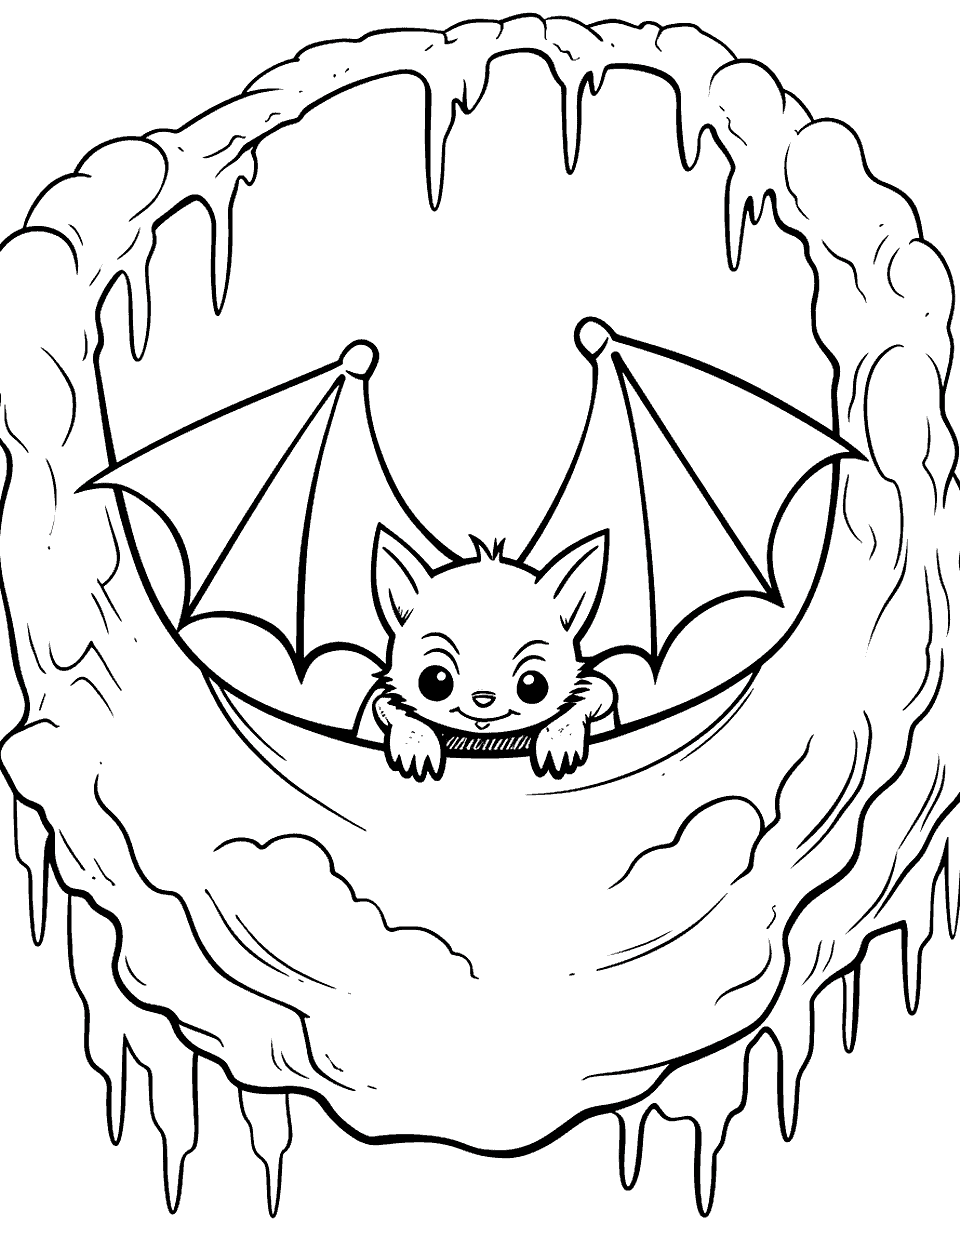 Bat in a Cave Coloring Page - A peaceful scene of a bat in a cave.